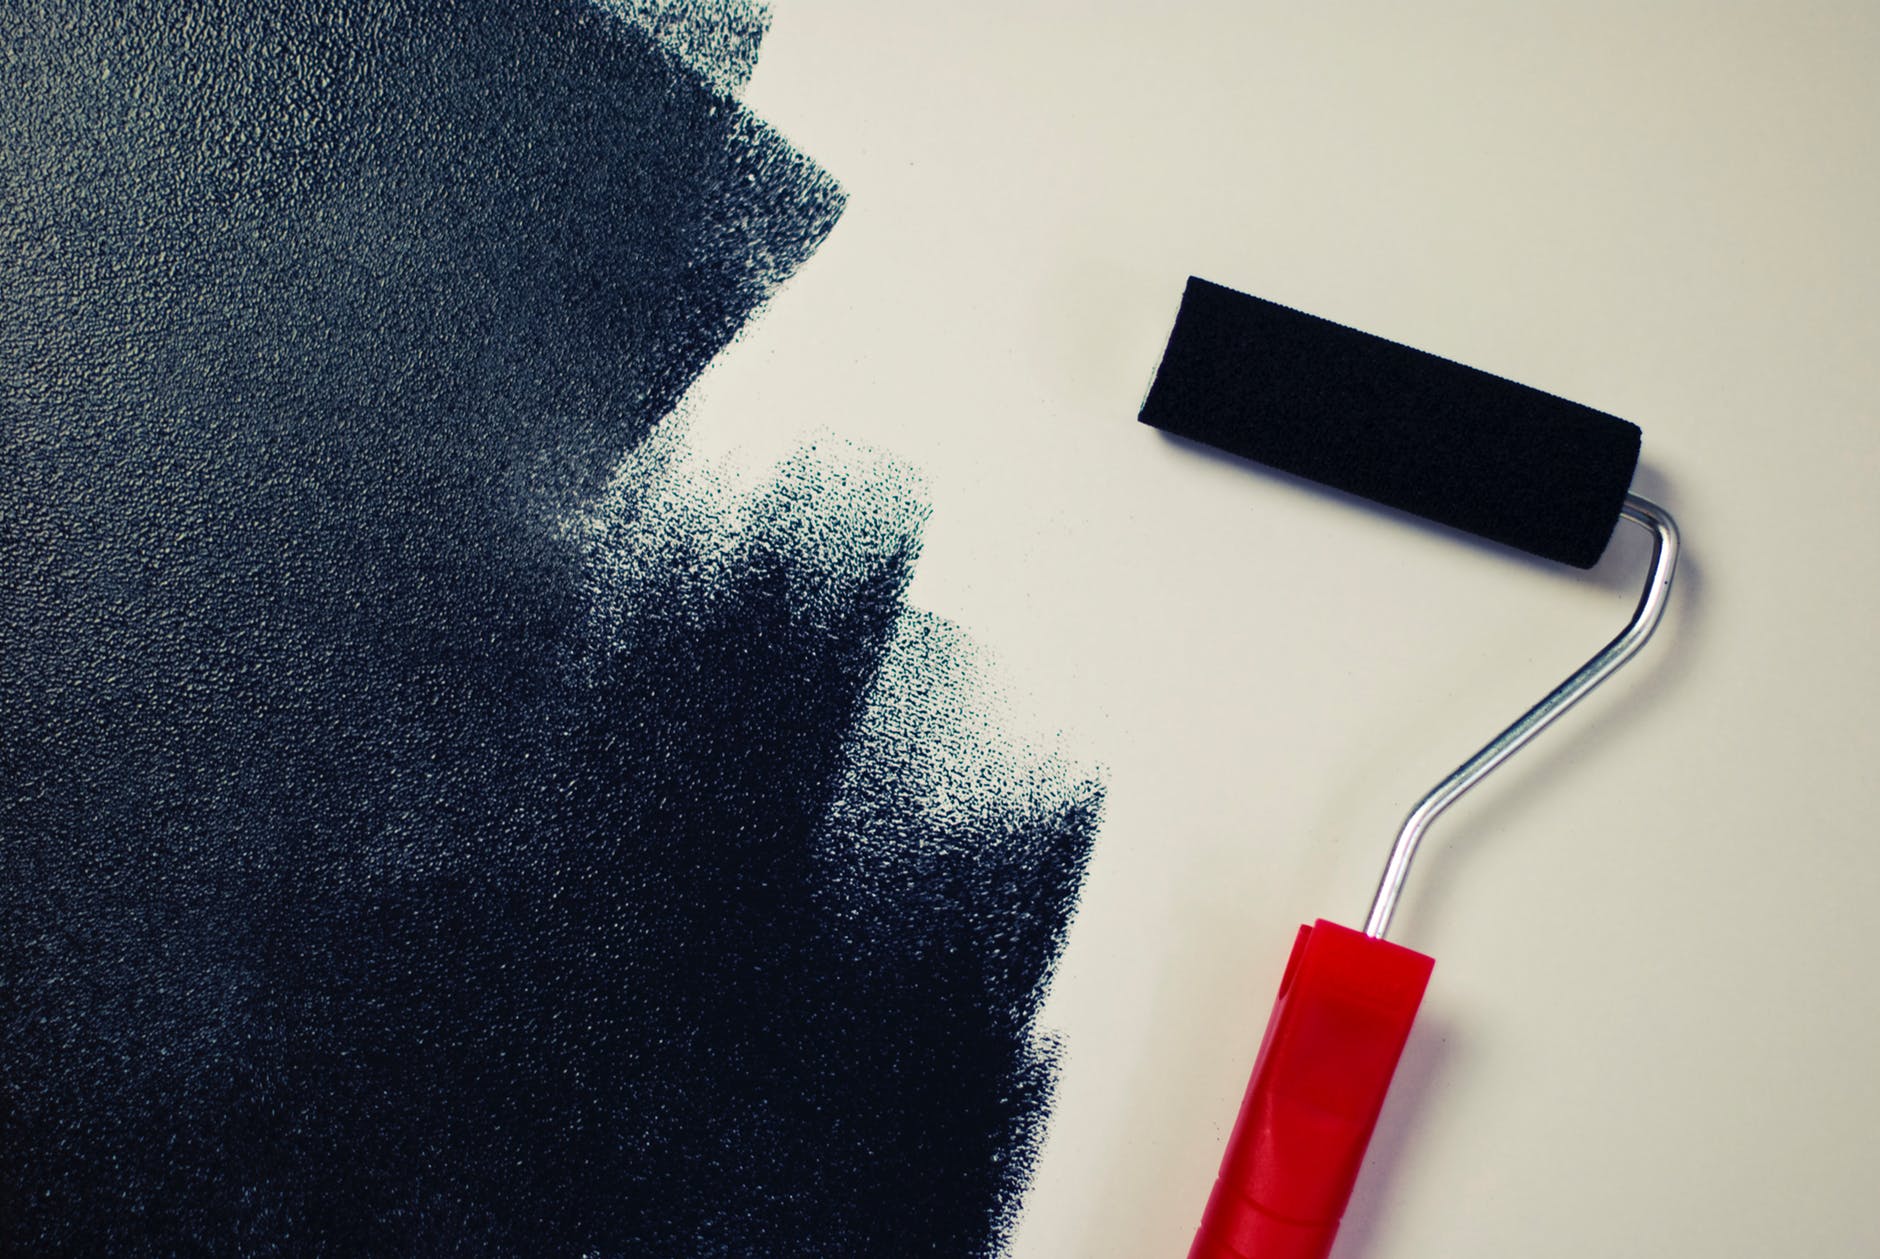 5 Tips for Hiring a Professional Painter